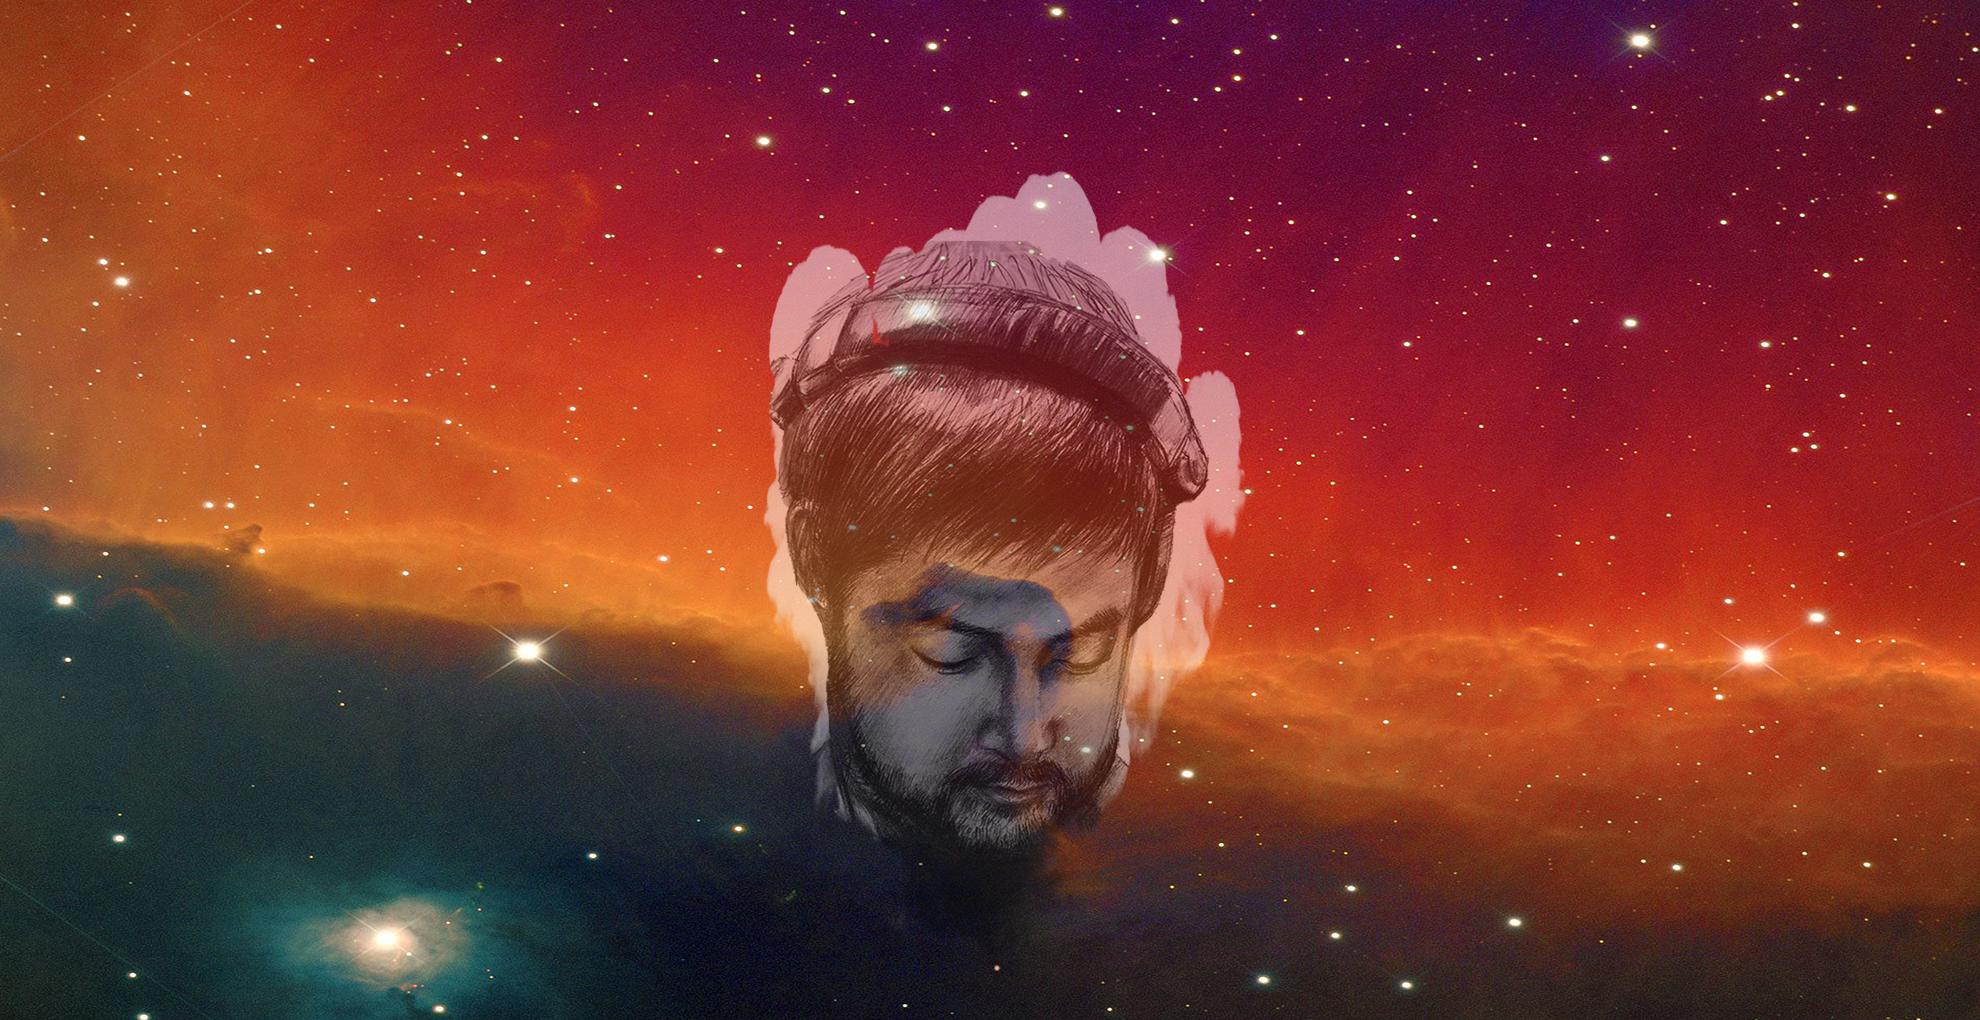 Nujabes wallpaper i made